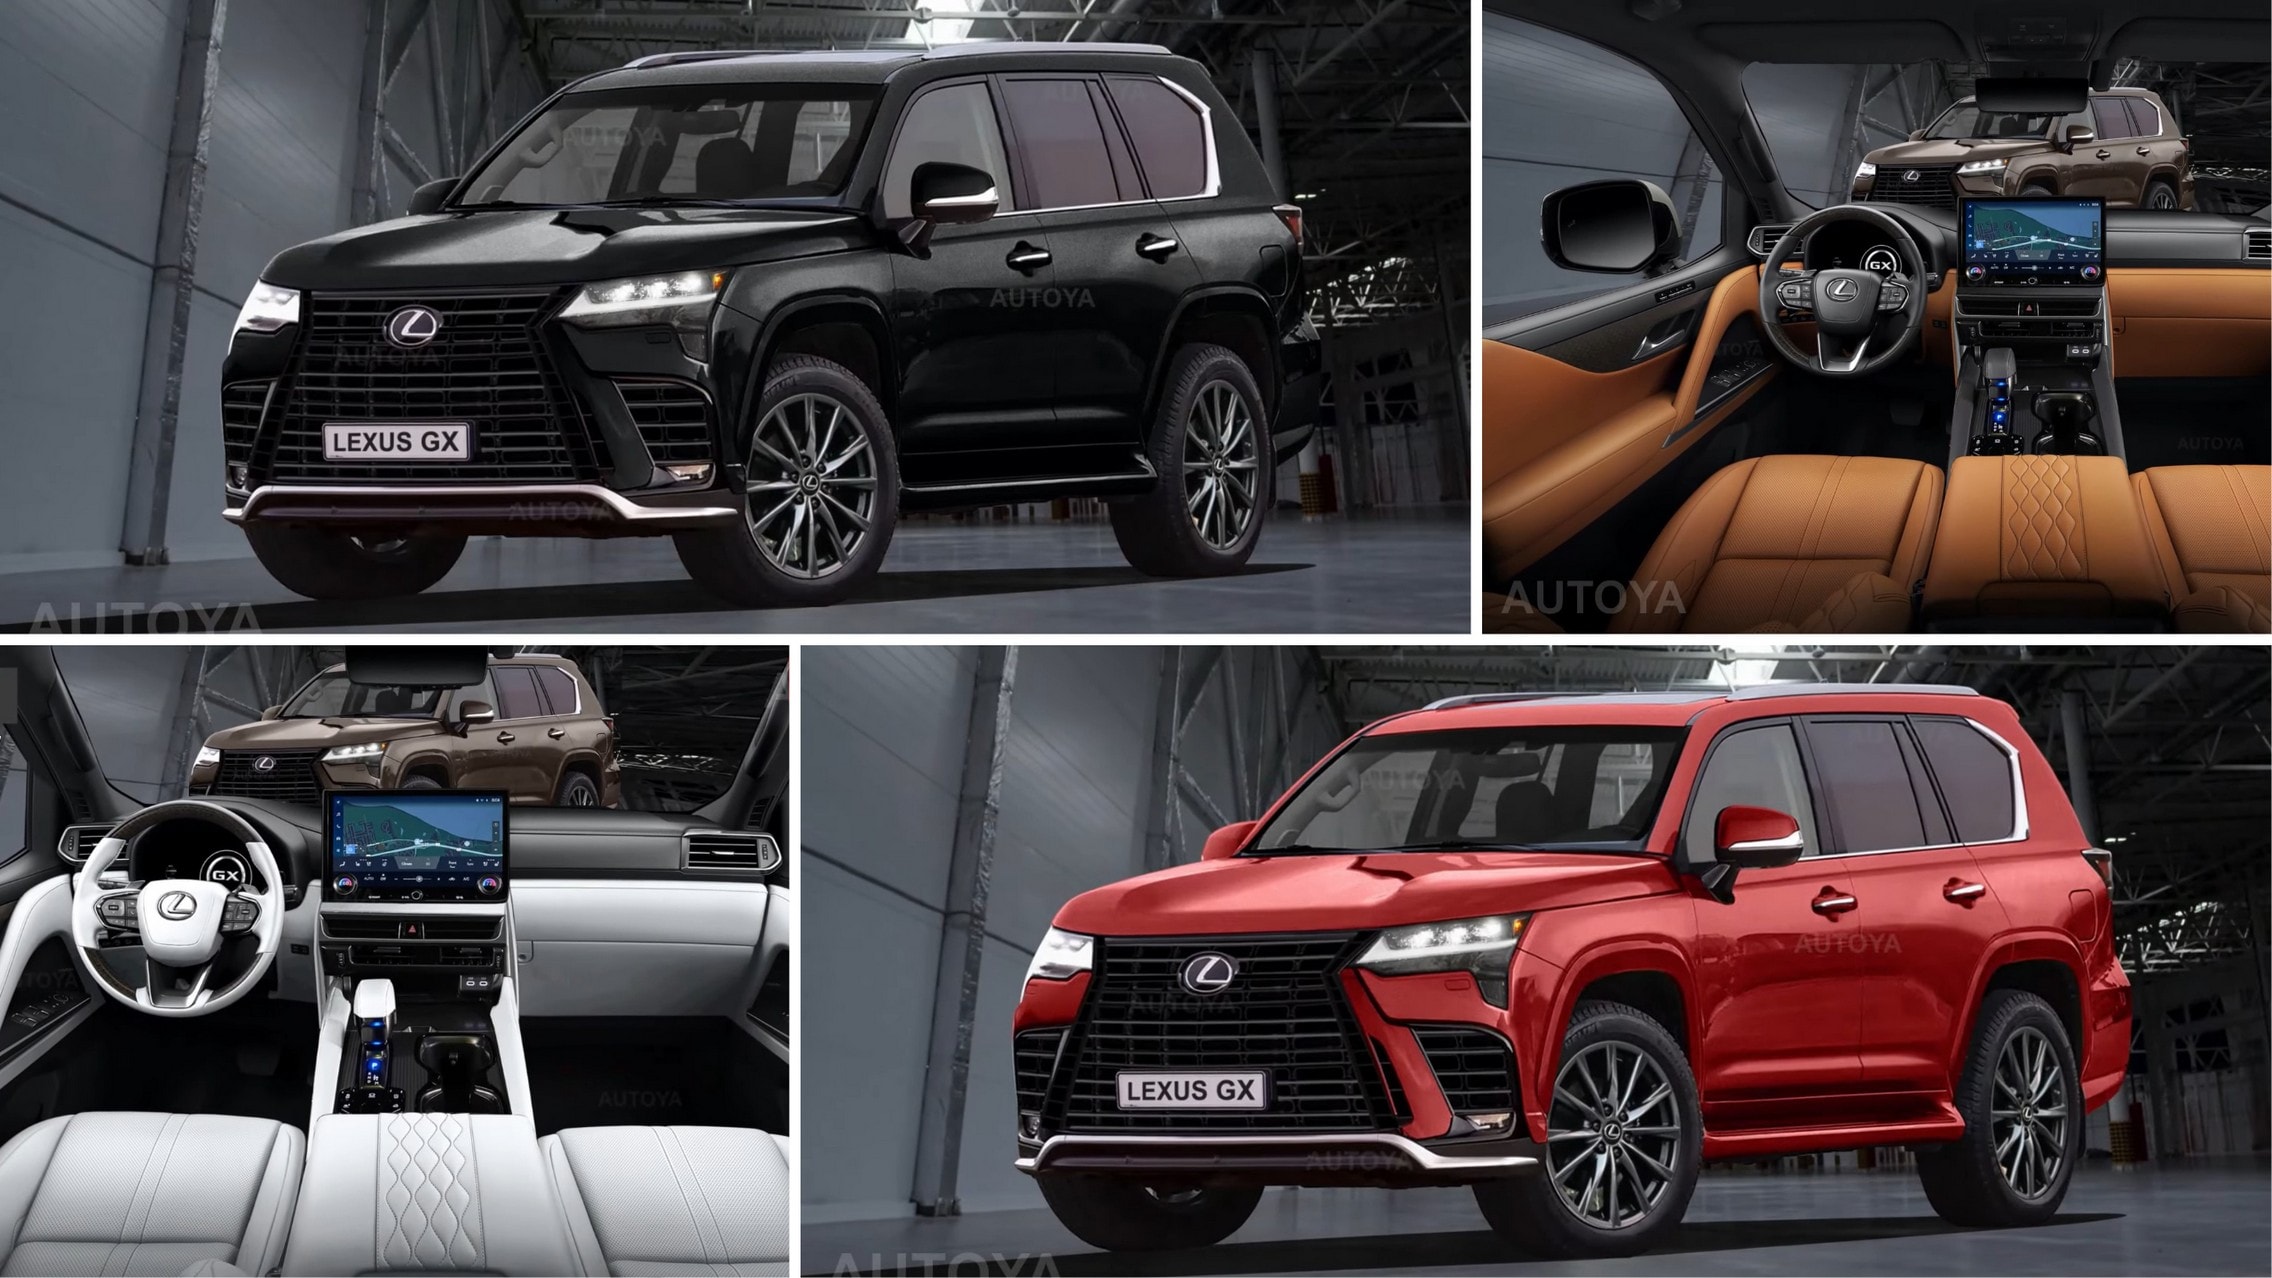 Imagined 2024 Lexus Gx Tough Luxury Suv Reveals Everything Inside And Out 215137 1 